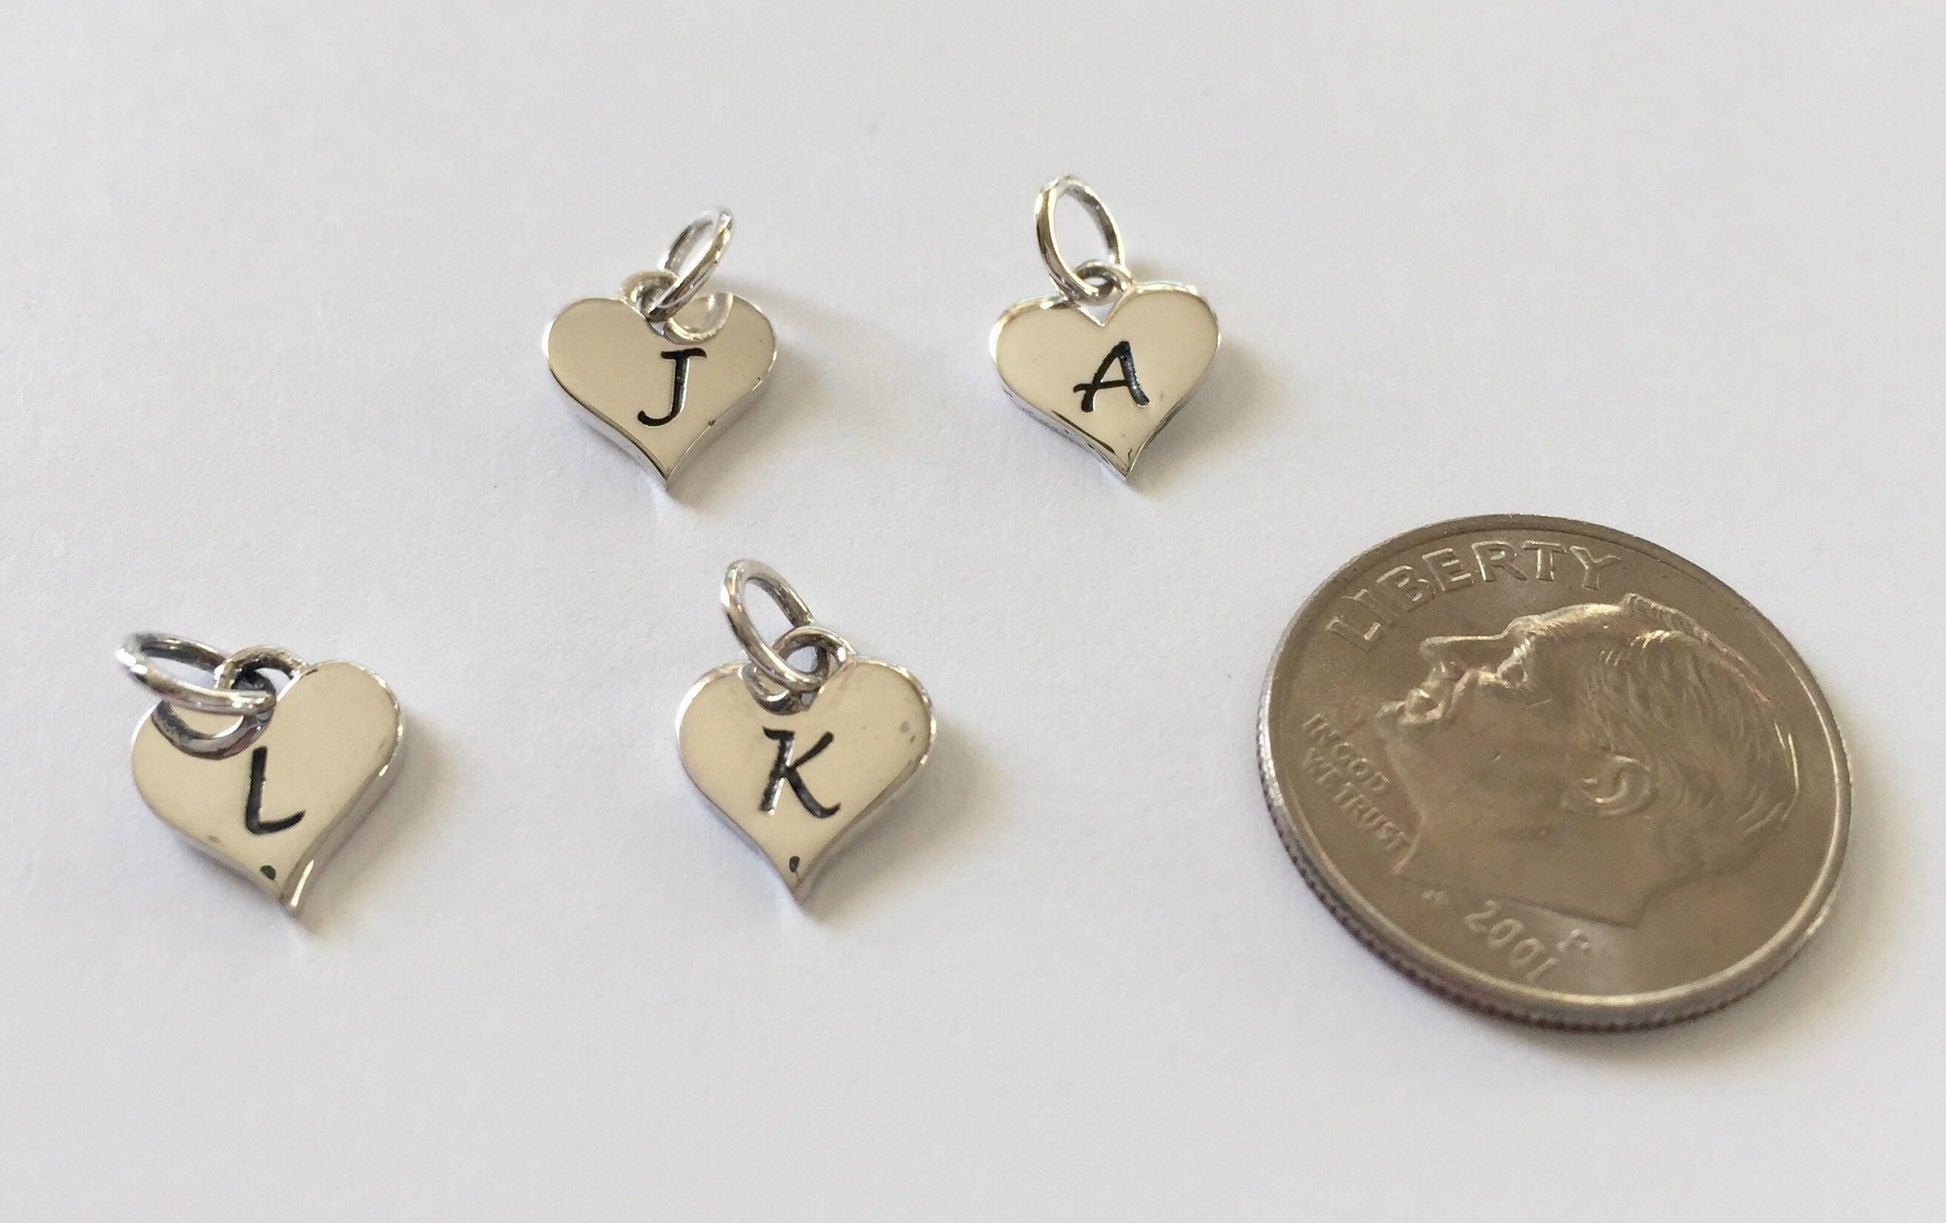 sterling silver heart shaped initial charms next to a  dime for size comparison